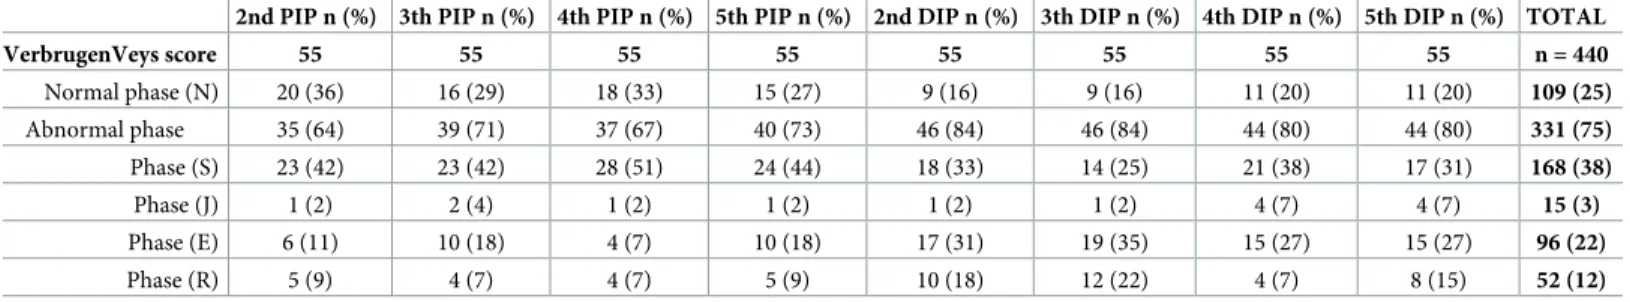 Table 2. The prevalence of Verbruggen-Veys radiographic scoring system features in interphalangeal joints of 2th–5th fingers.